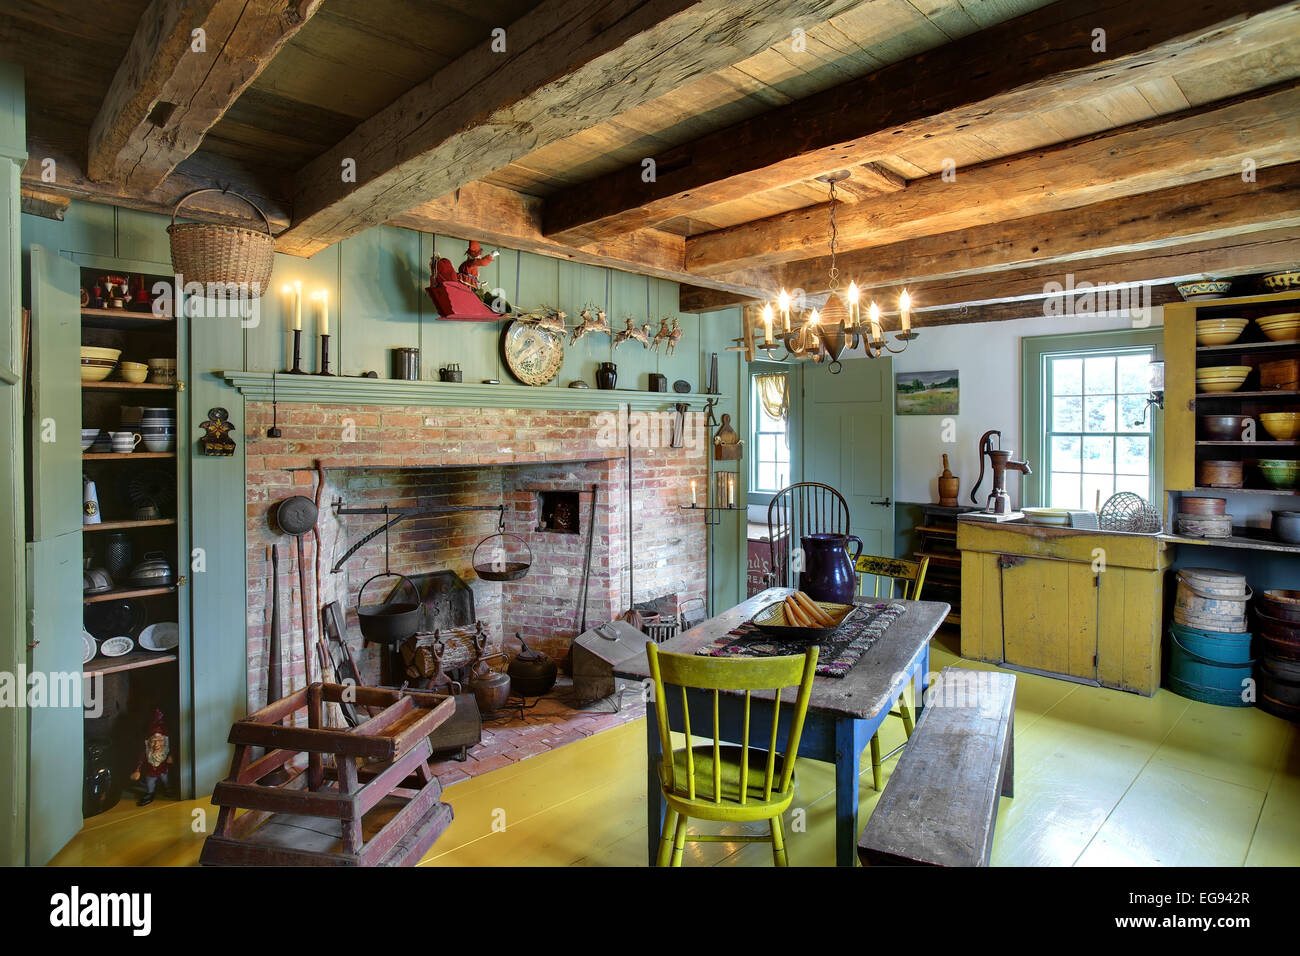 The kitchen, dining room and fireplace in a restored 17th century primitive colonial style home. Stock Photo